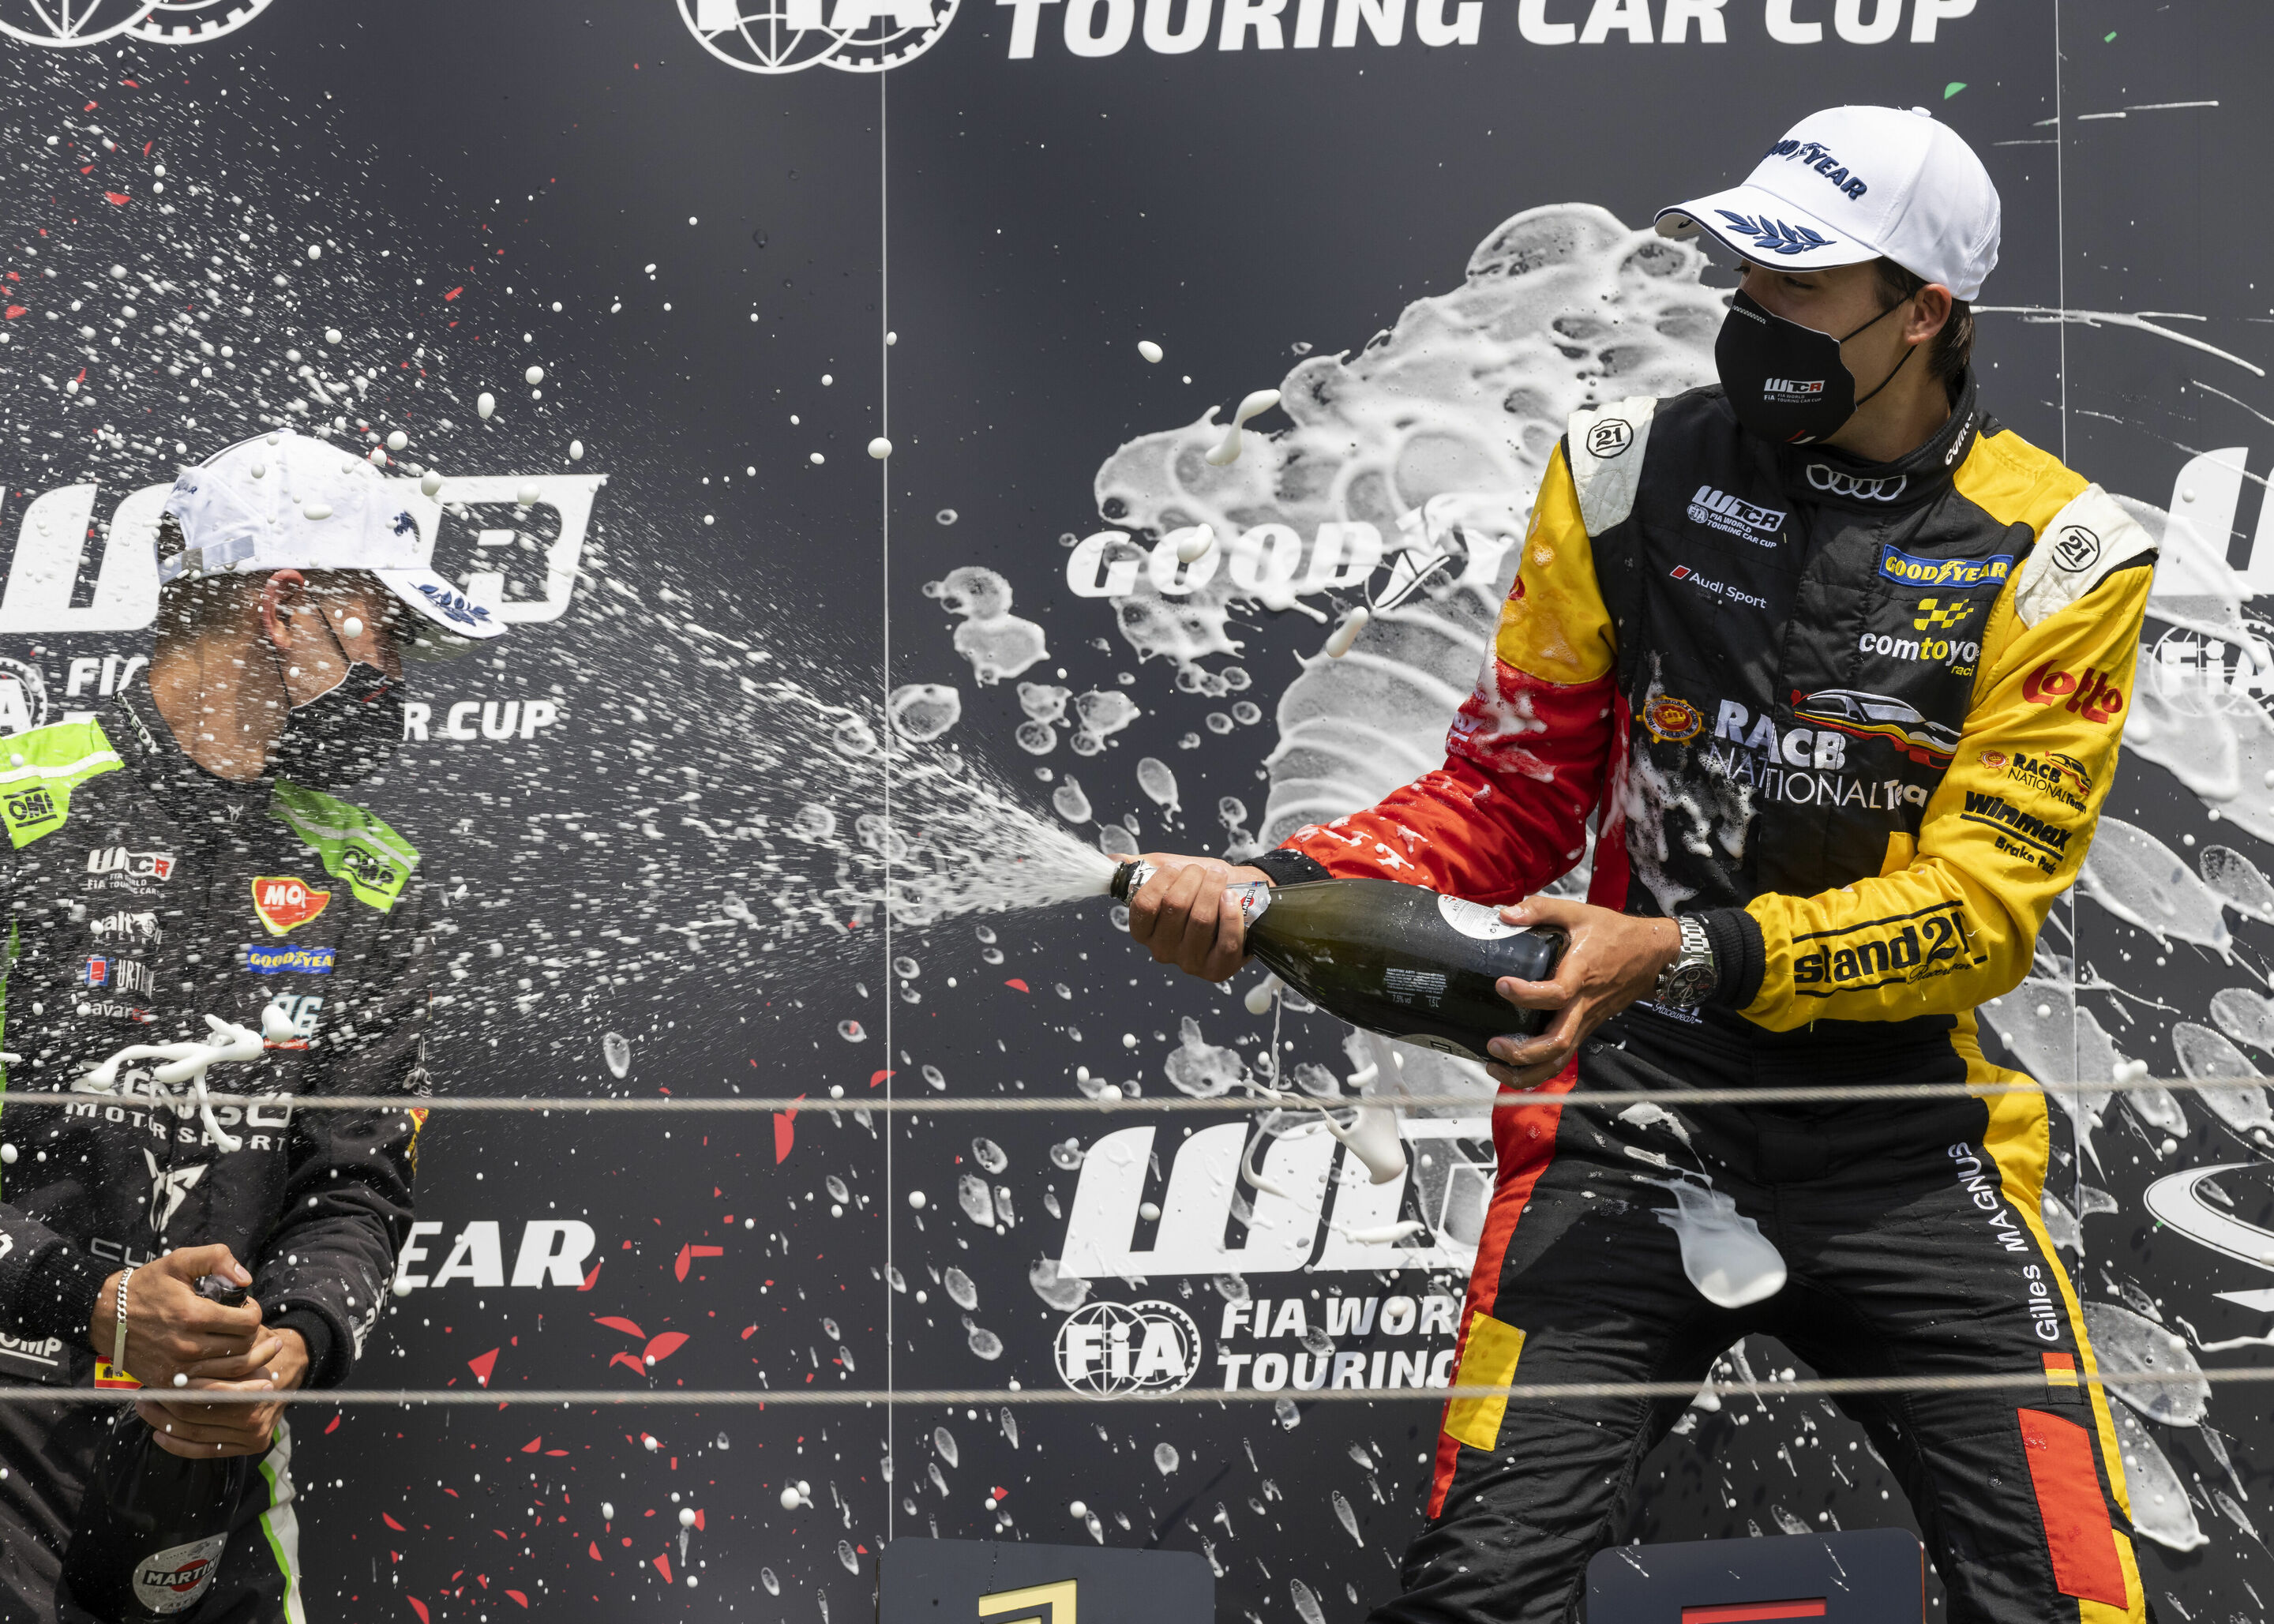 WTCR – FIA World Touring Car Cup 2021